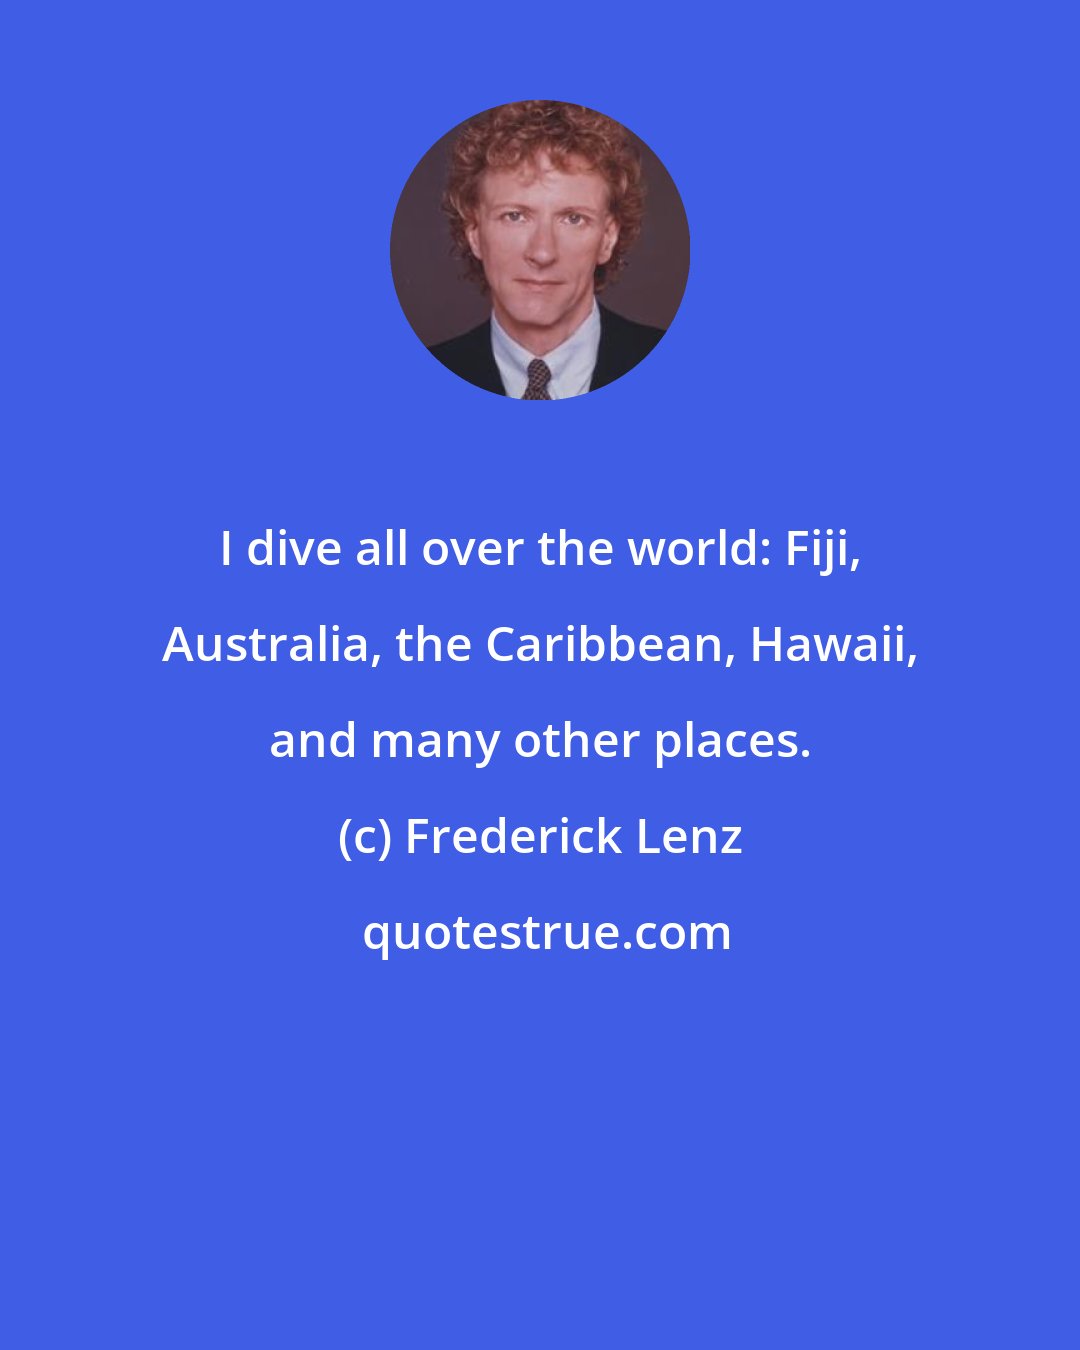 Frederick Lenz: I dive all over the world: Fiji, Australia, the Caribbean, Hawaii, and many other places.